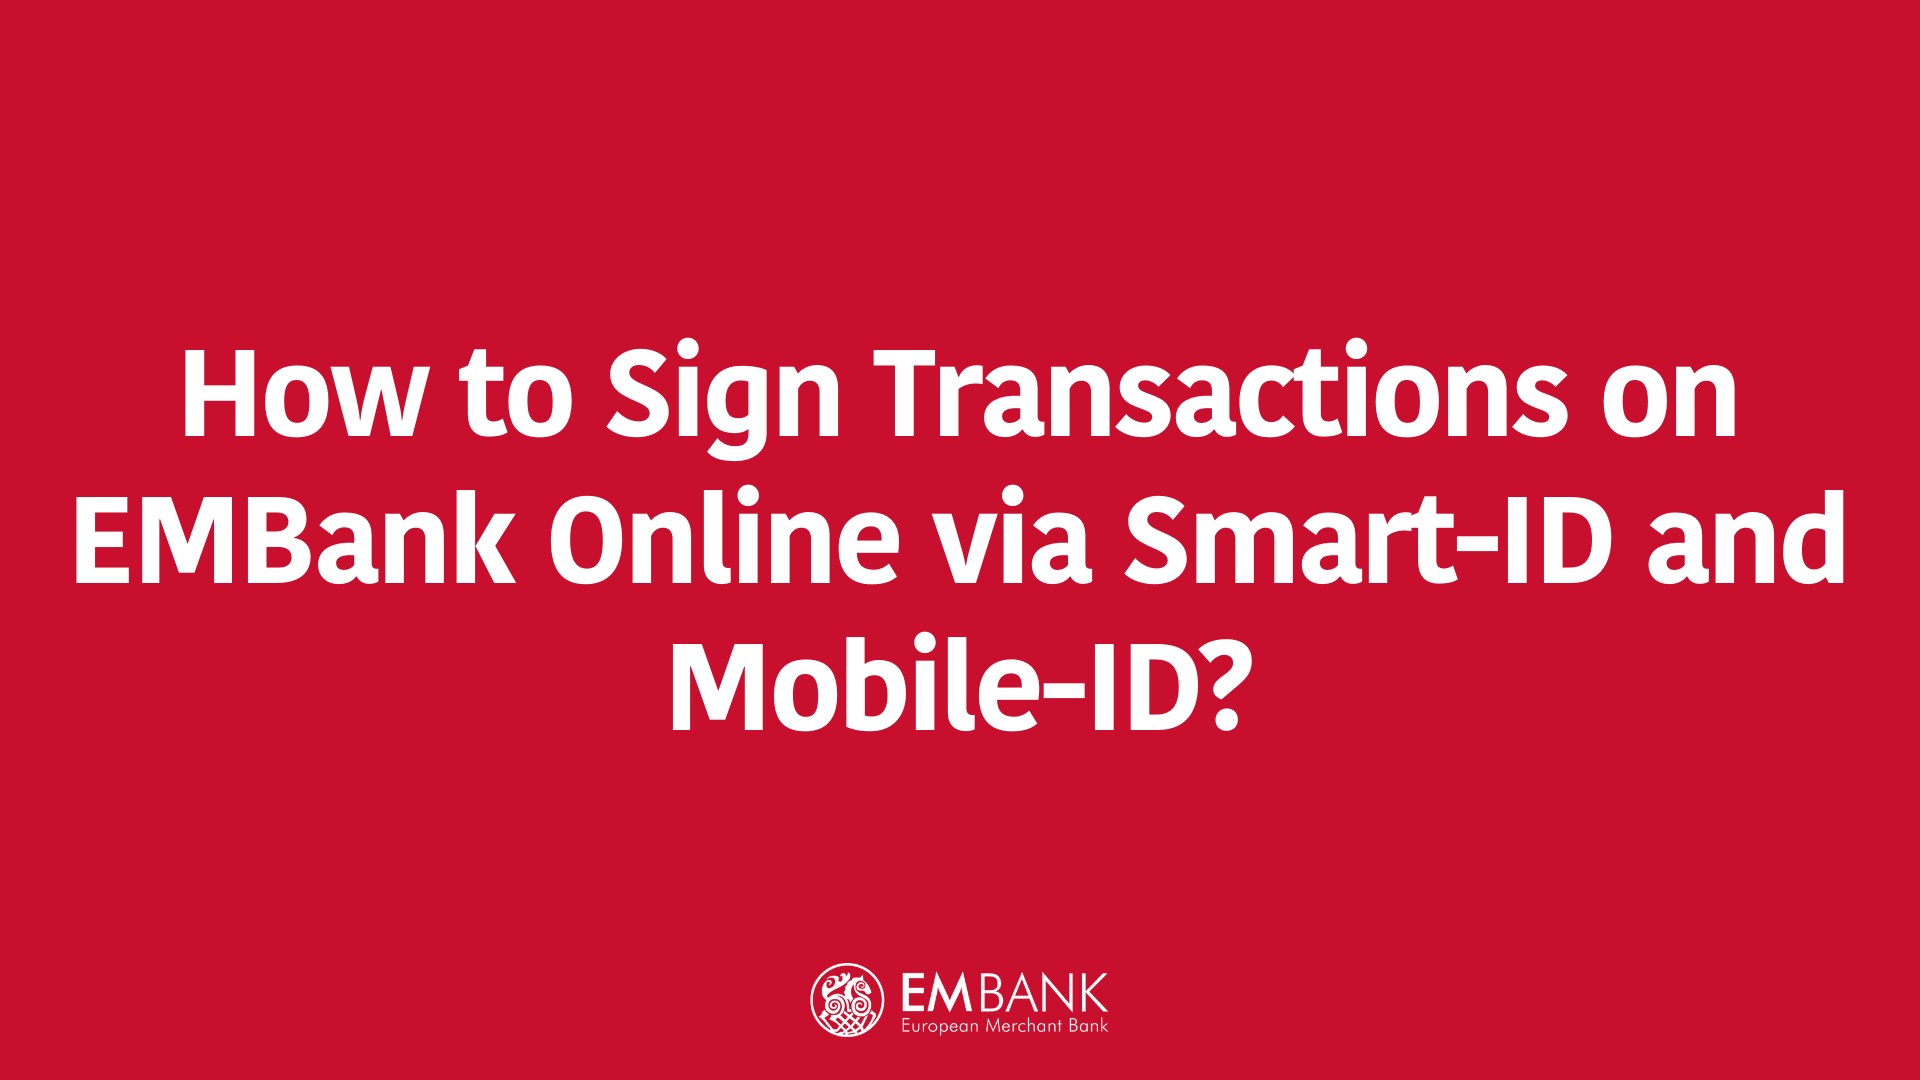 How to Sign Transactions on EMBank Online via Smart-ID and Mobile-ID?